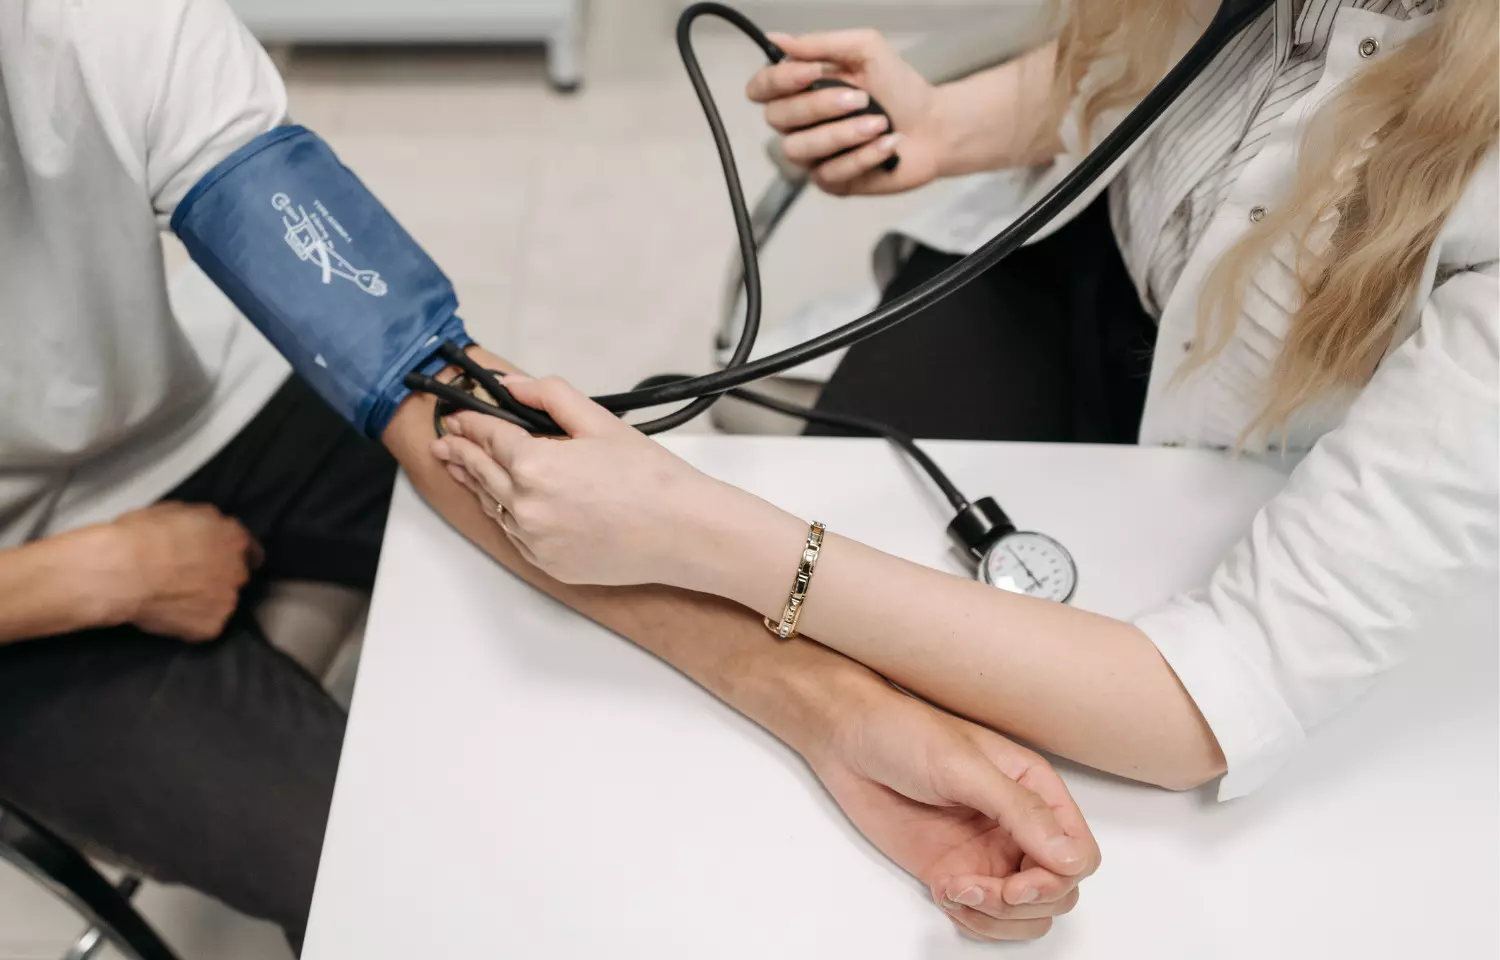 Hypertension common among poorest and least educated globally